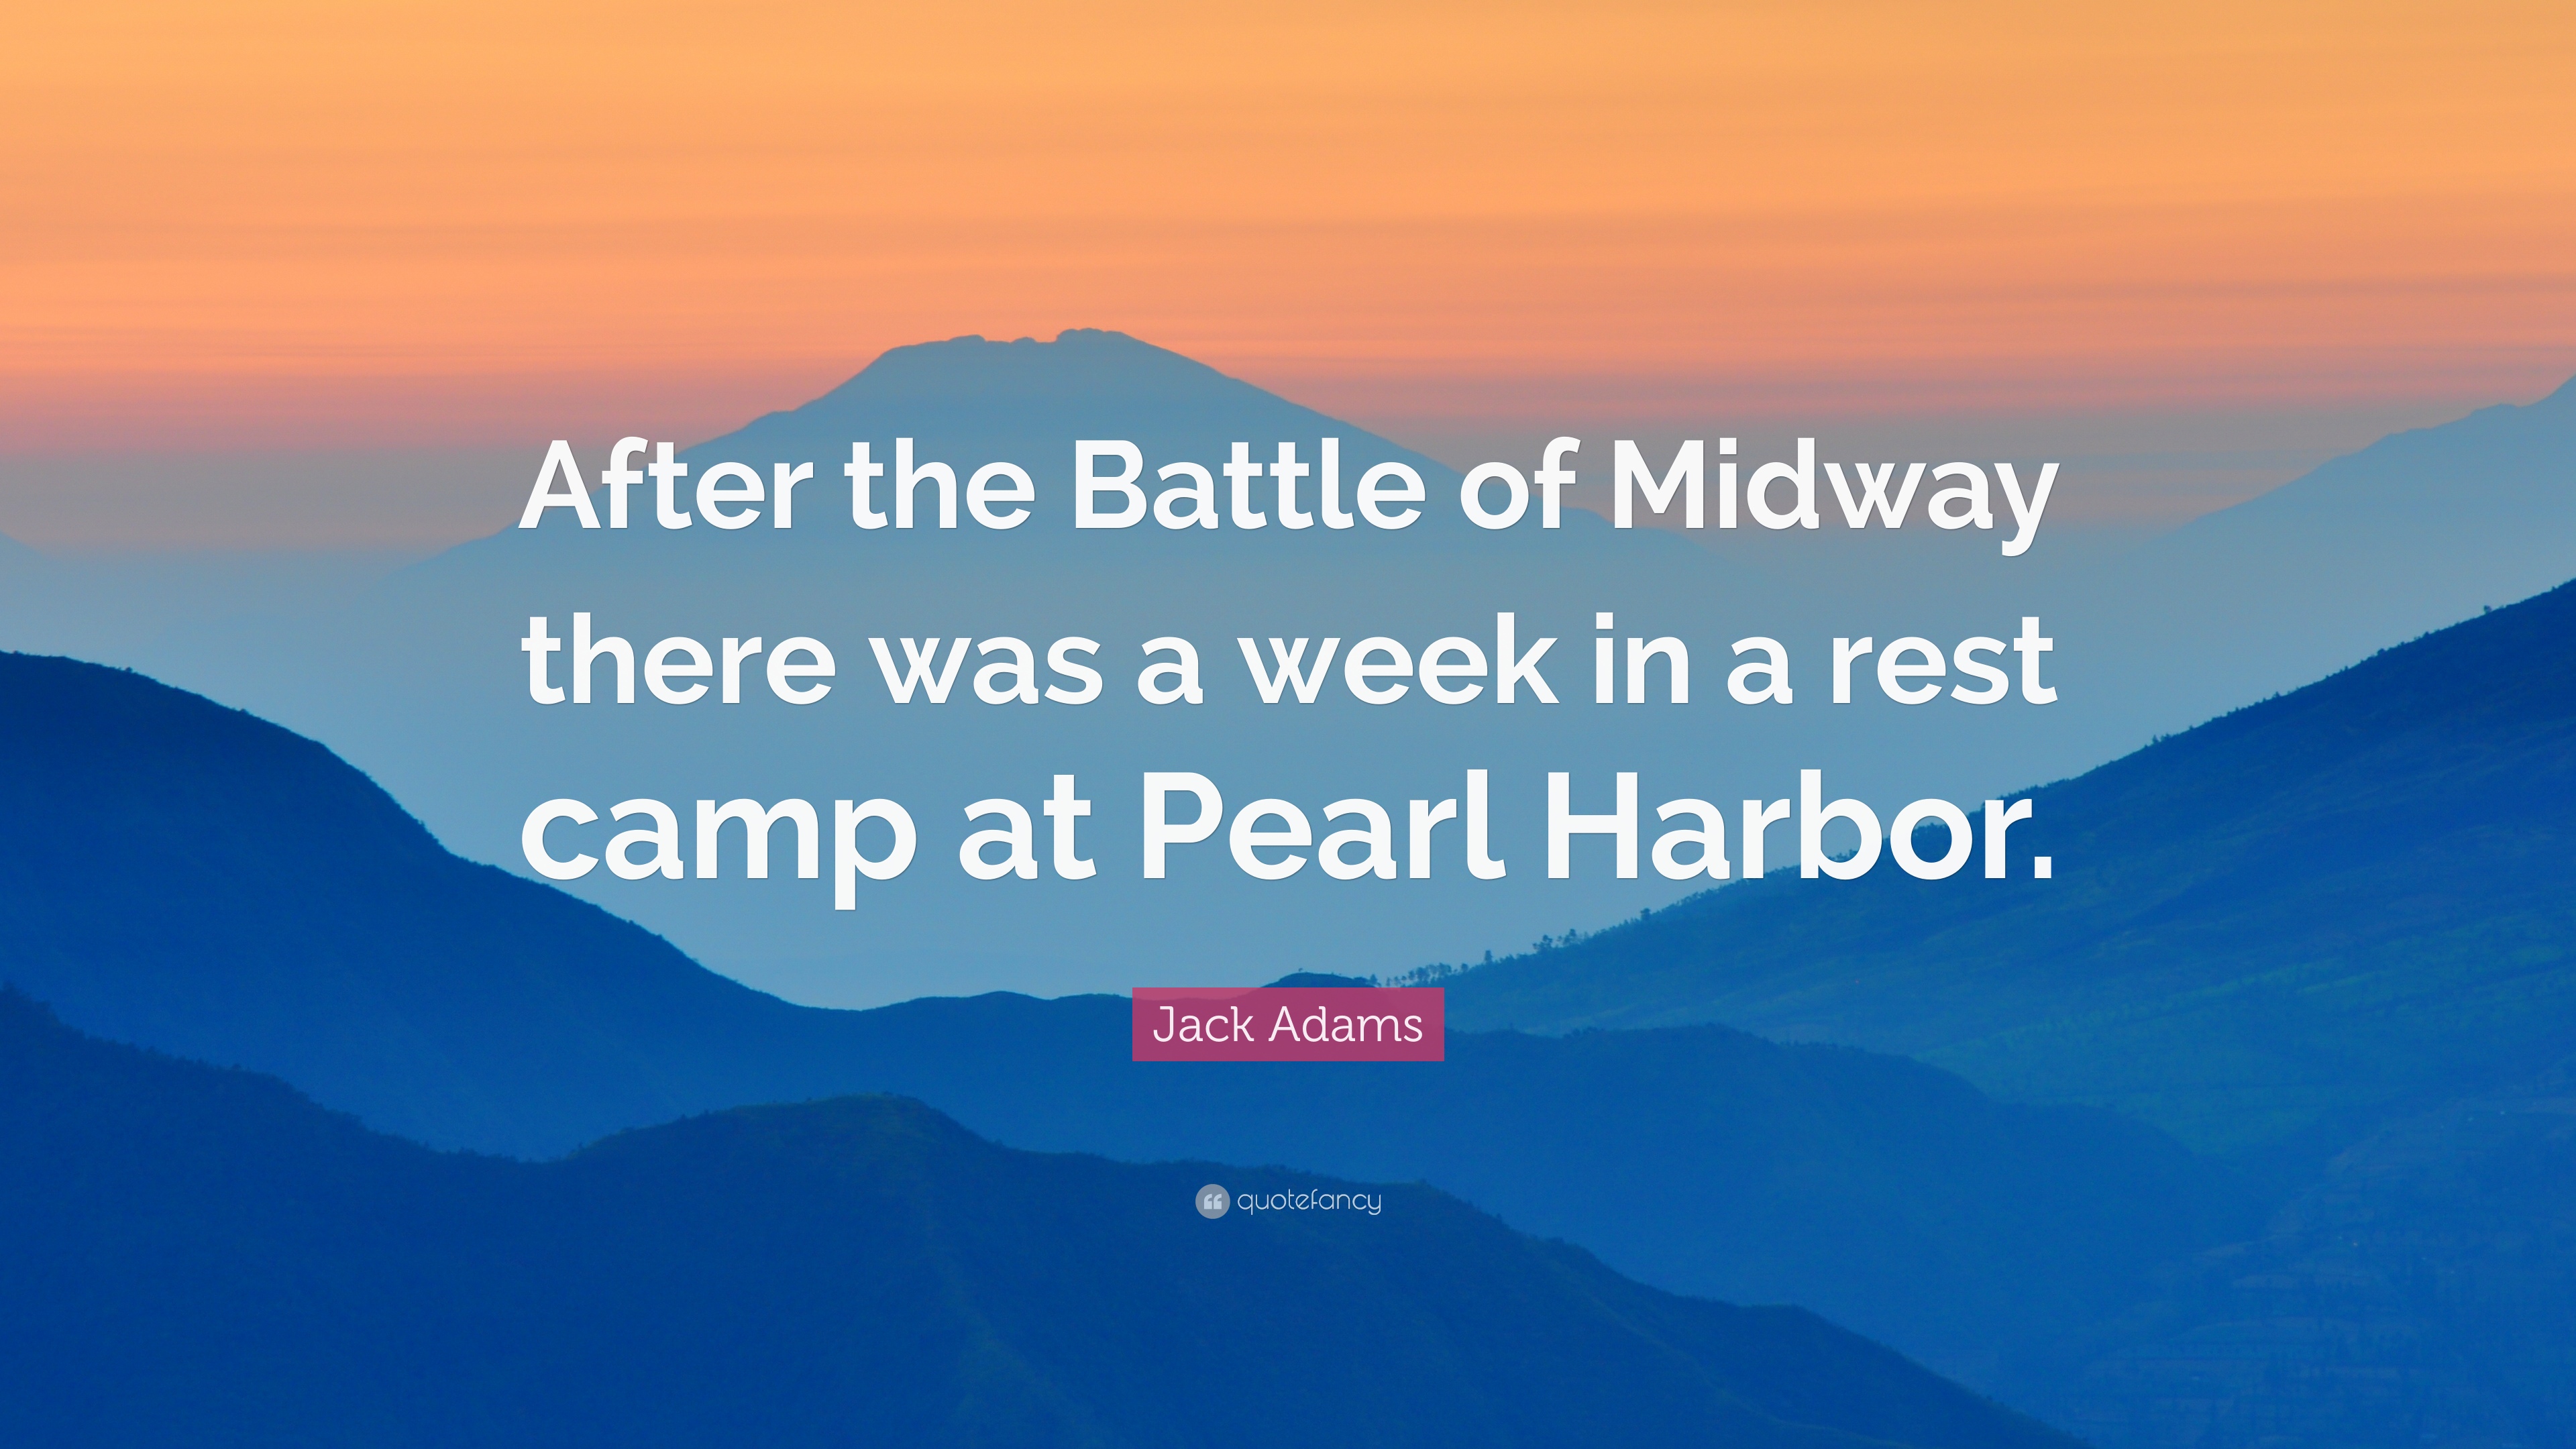 Jack Adams Quote: “After the Battle of Midway there was a week in a